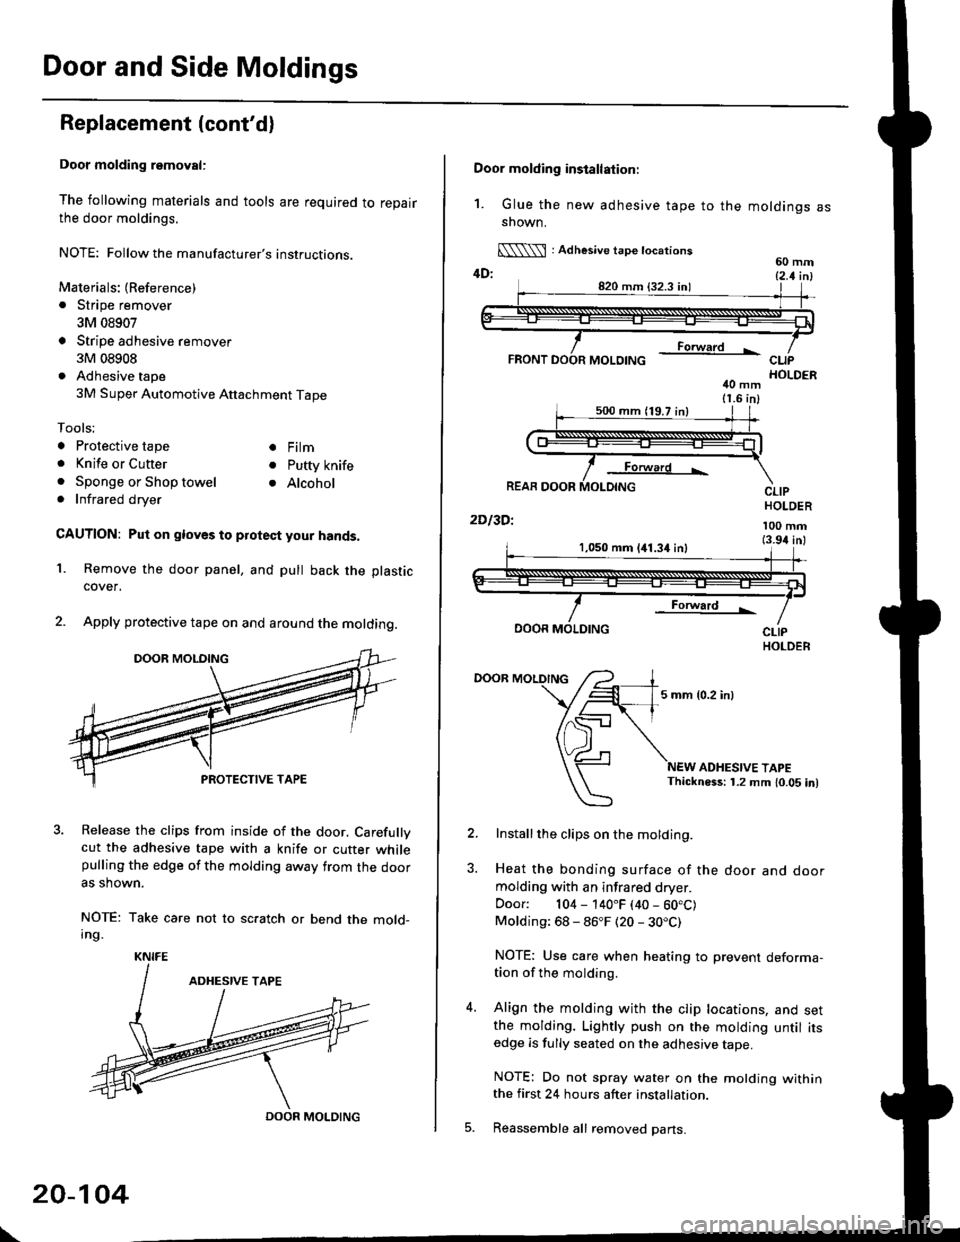 HONDA CIVIC 1998 6.G Workshop Manual Door and Side Moldings
Replacement (contdl
Door molding removal:
The following materials and tools are required to repairthe door moldings.
NOTE: Followthe manufacturers instructions.
Materials: (Re